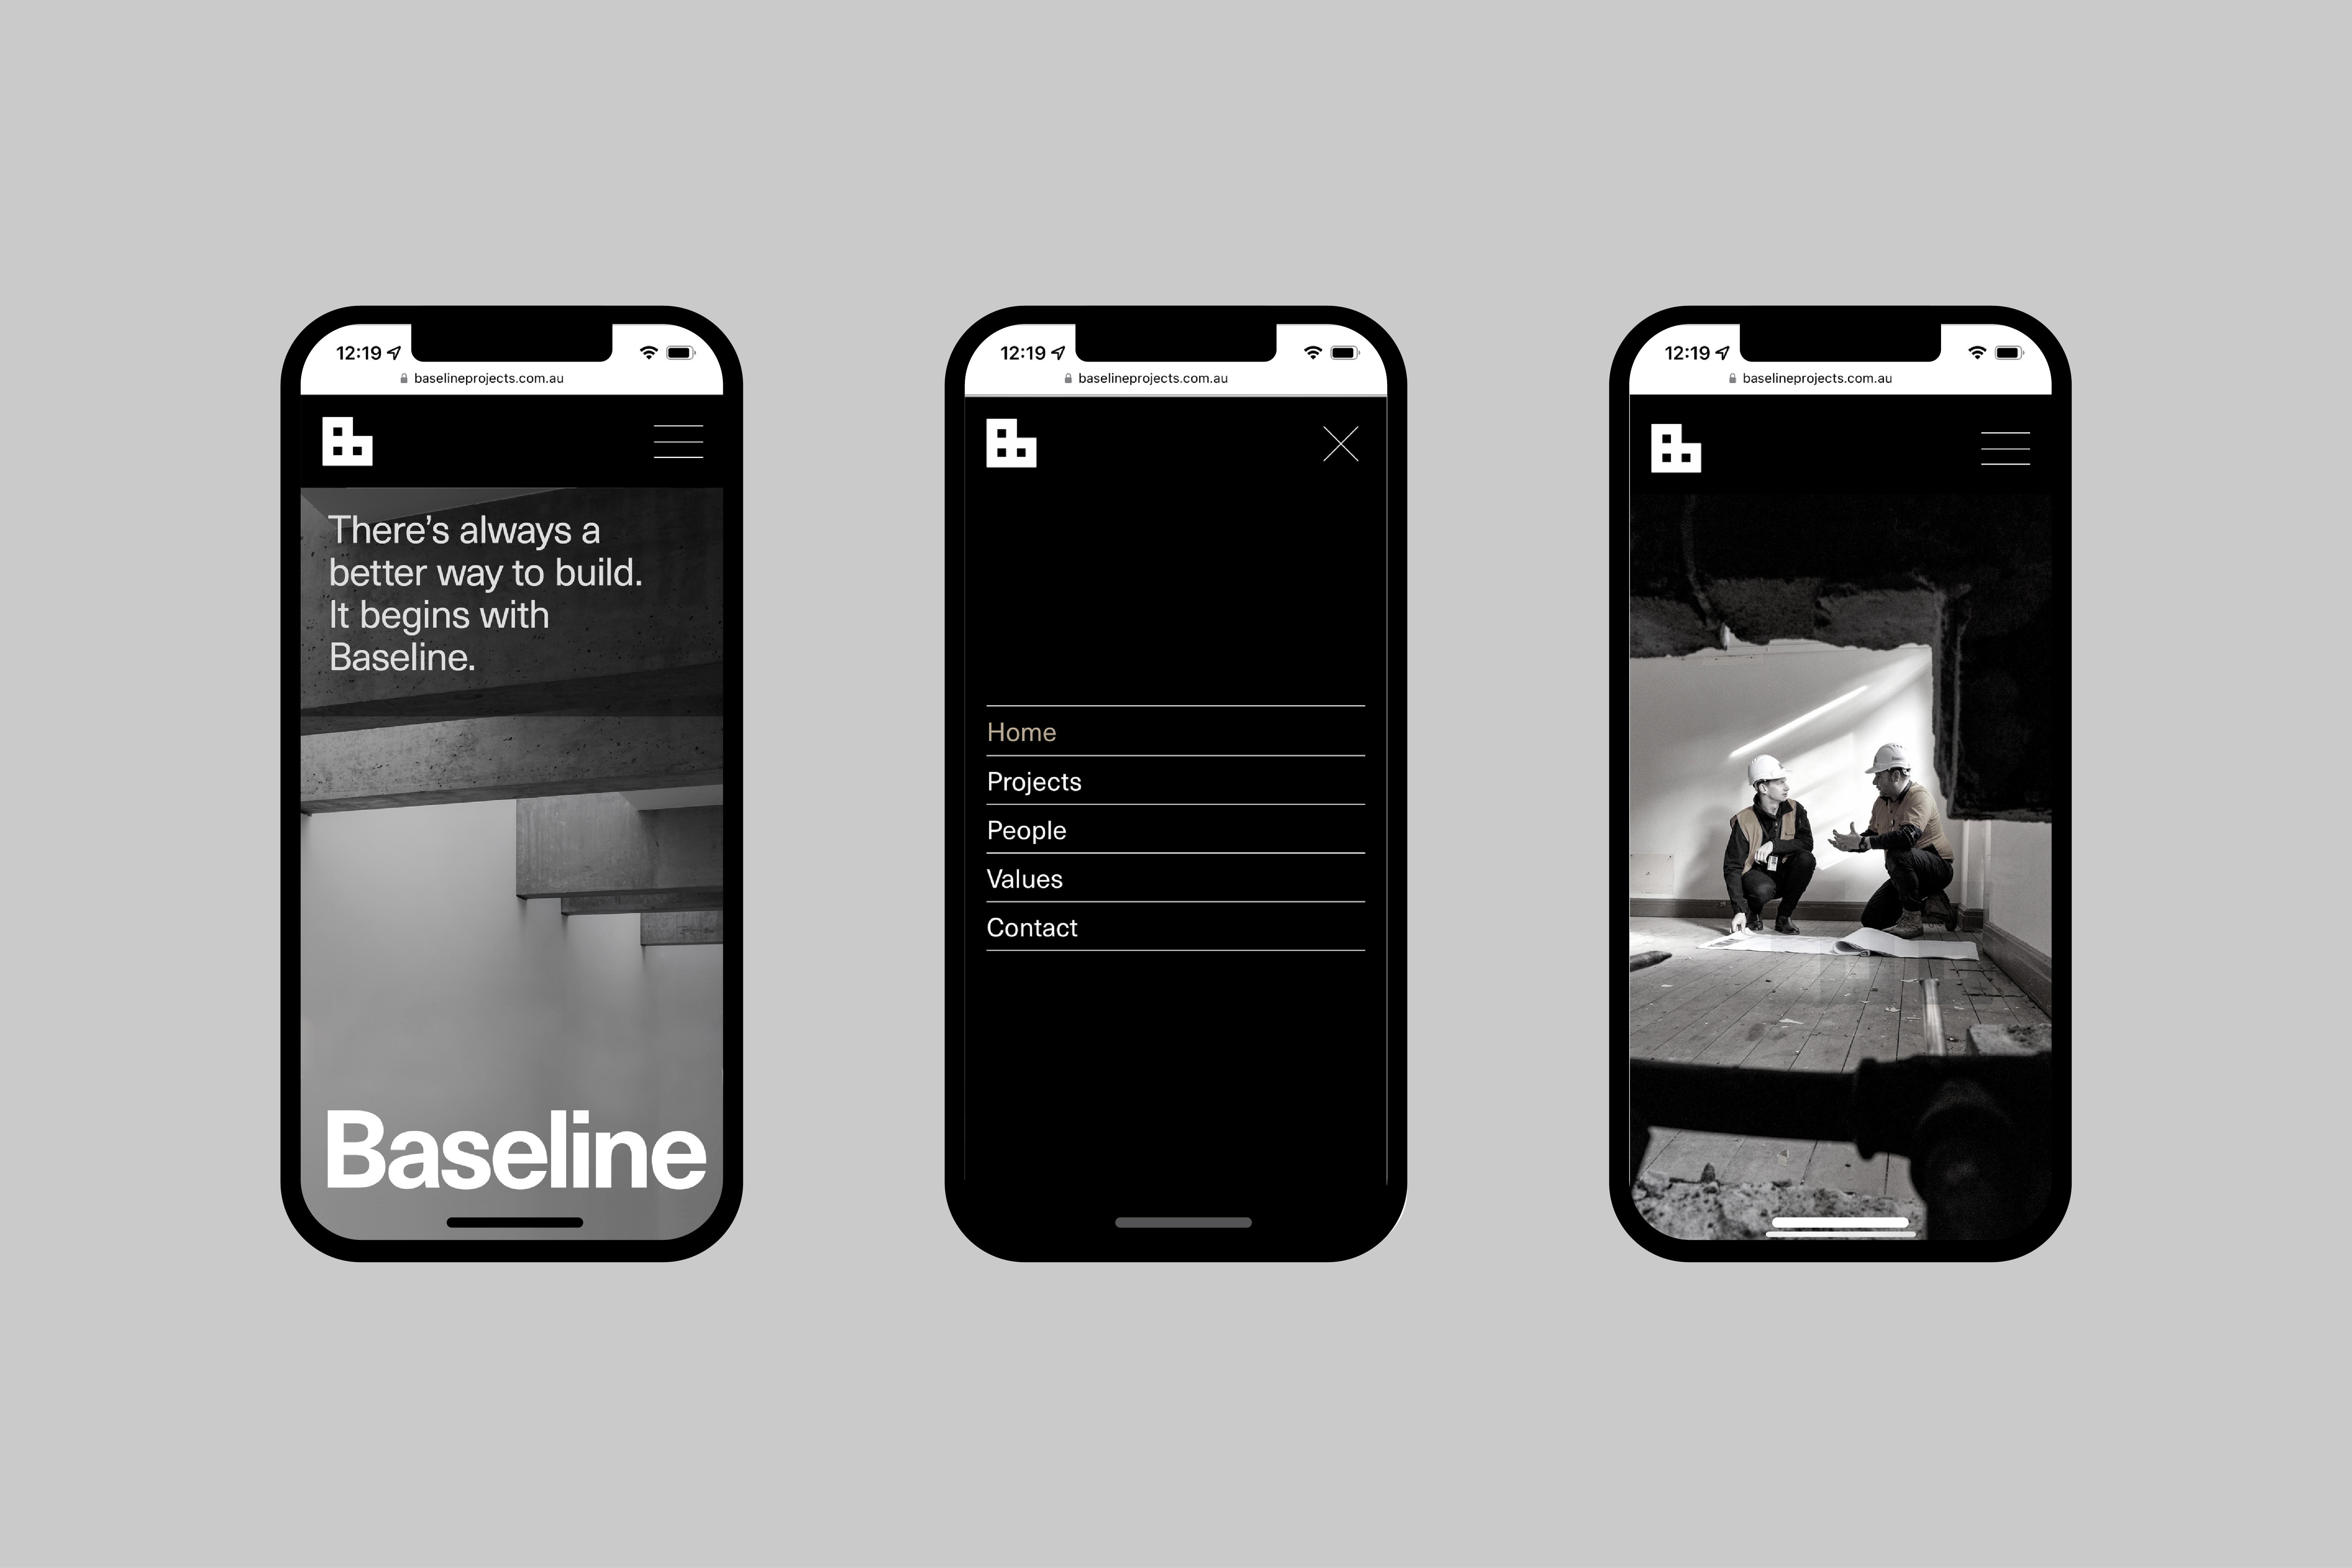 Logo, visual identity and website designed by Australian studio Garbett for government and commercial builder Baseline. Reviewed by Richard Baird for BP&O.